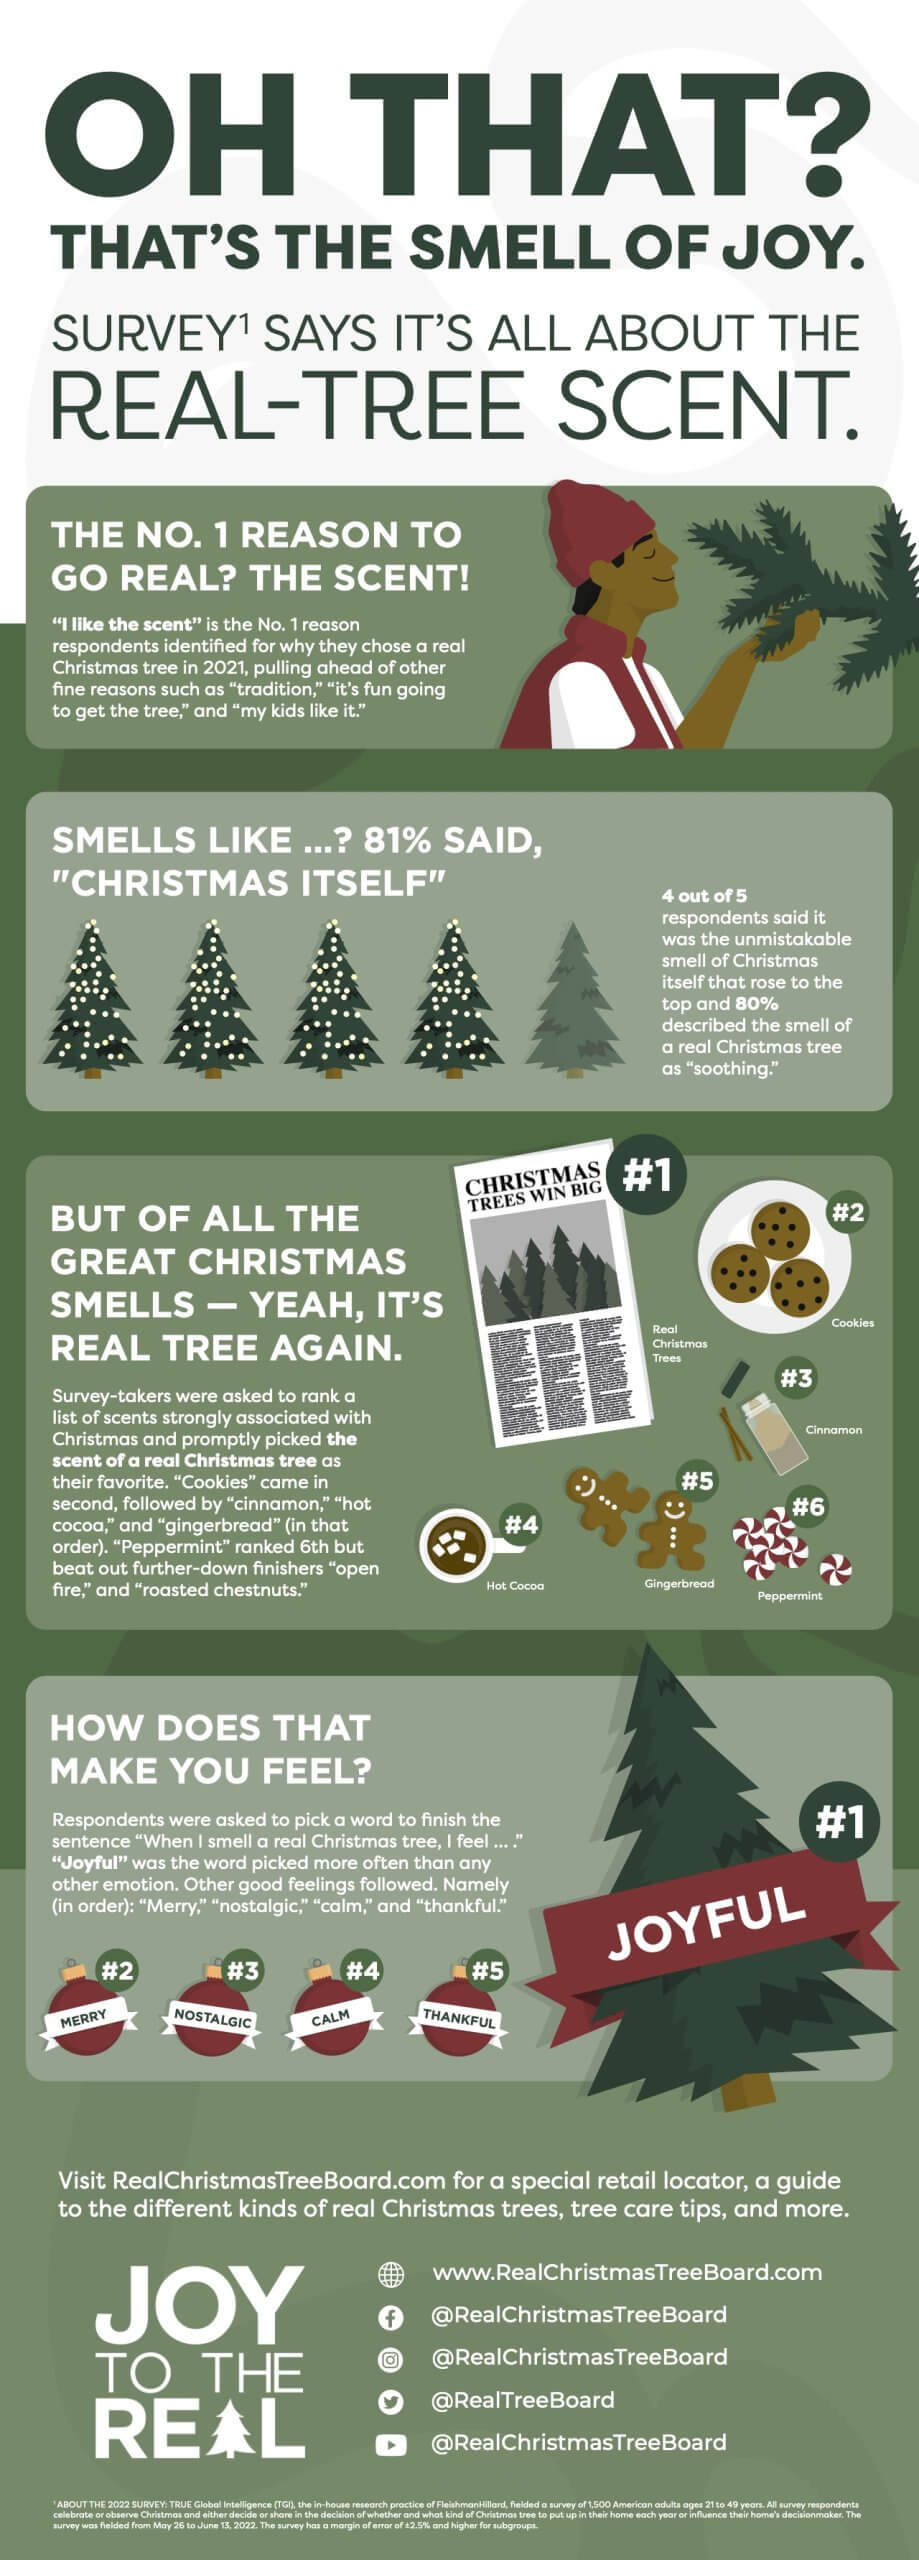 Real Christmas Trees Bring the Scent to the Season [Infographic]